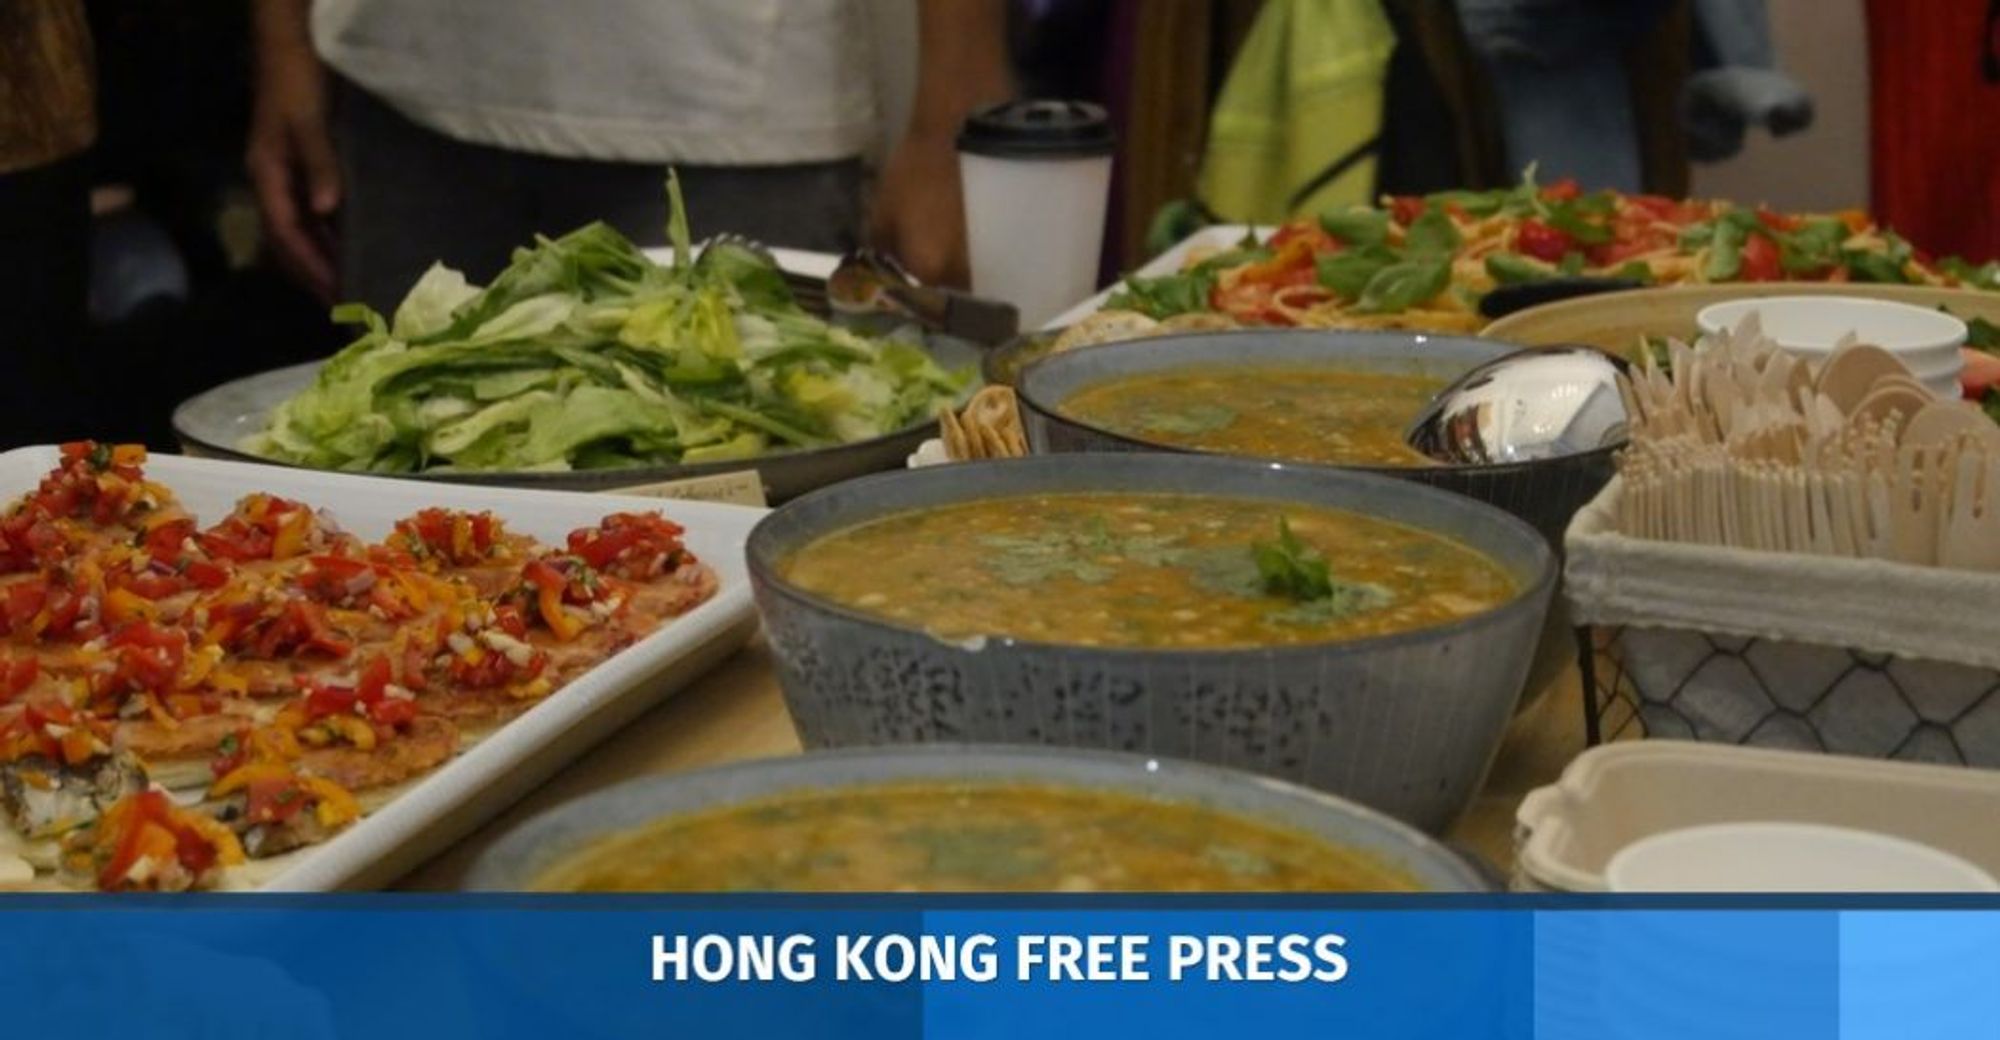 'It's all about understanding': Refugees in Hong Kong dine together to mark World Refugee Day | Hong Kong Free Press HKFP